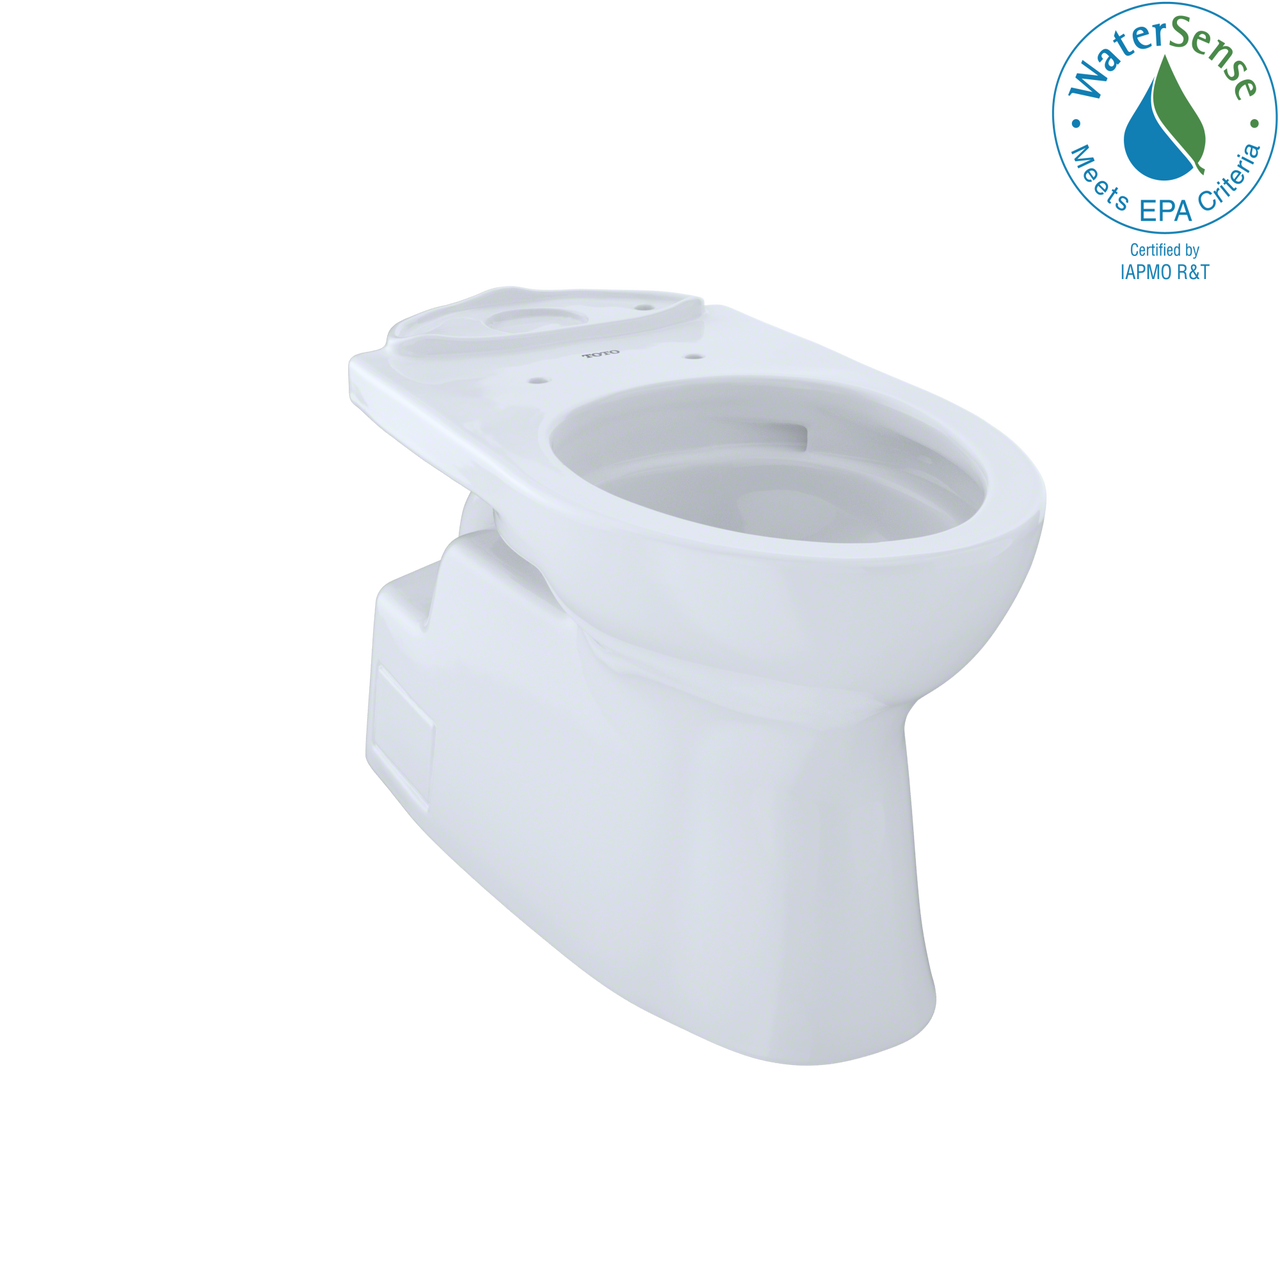 TOTO Vespin II Universal Height Elongated Skirted Toilet Bowl with CeFiONtect,  - CT474CUFG#01 - BNGBath